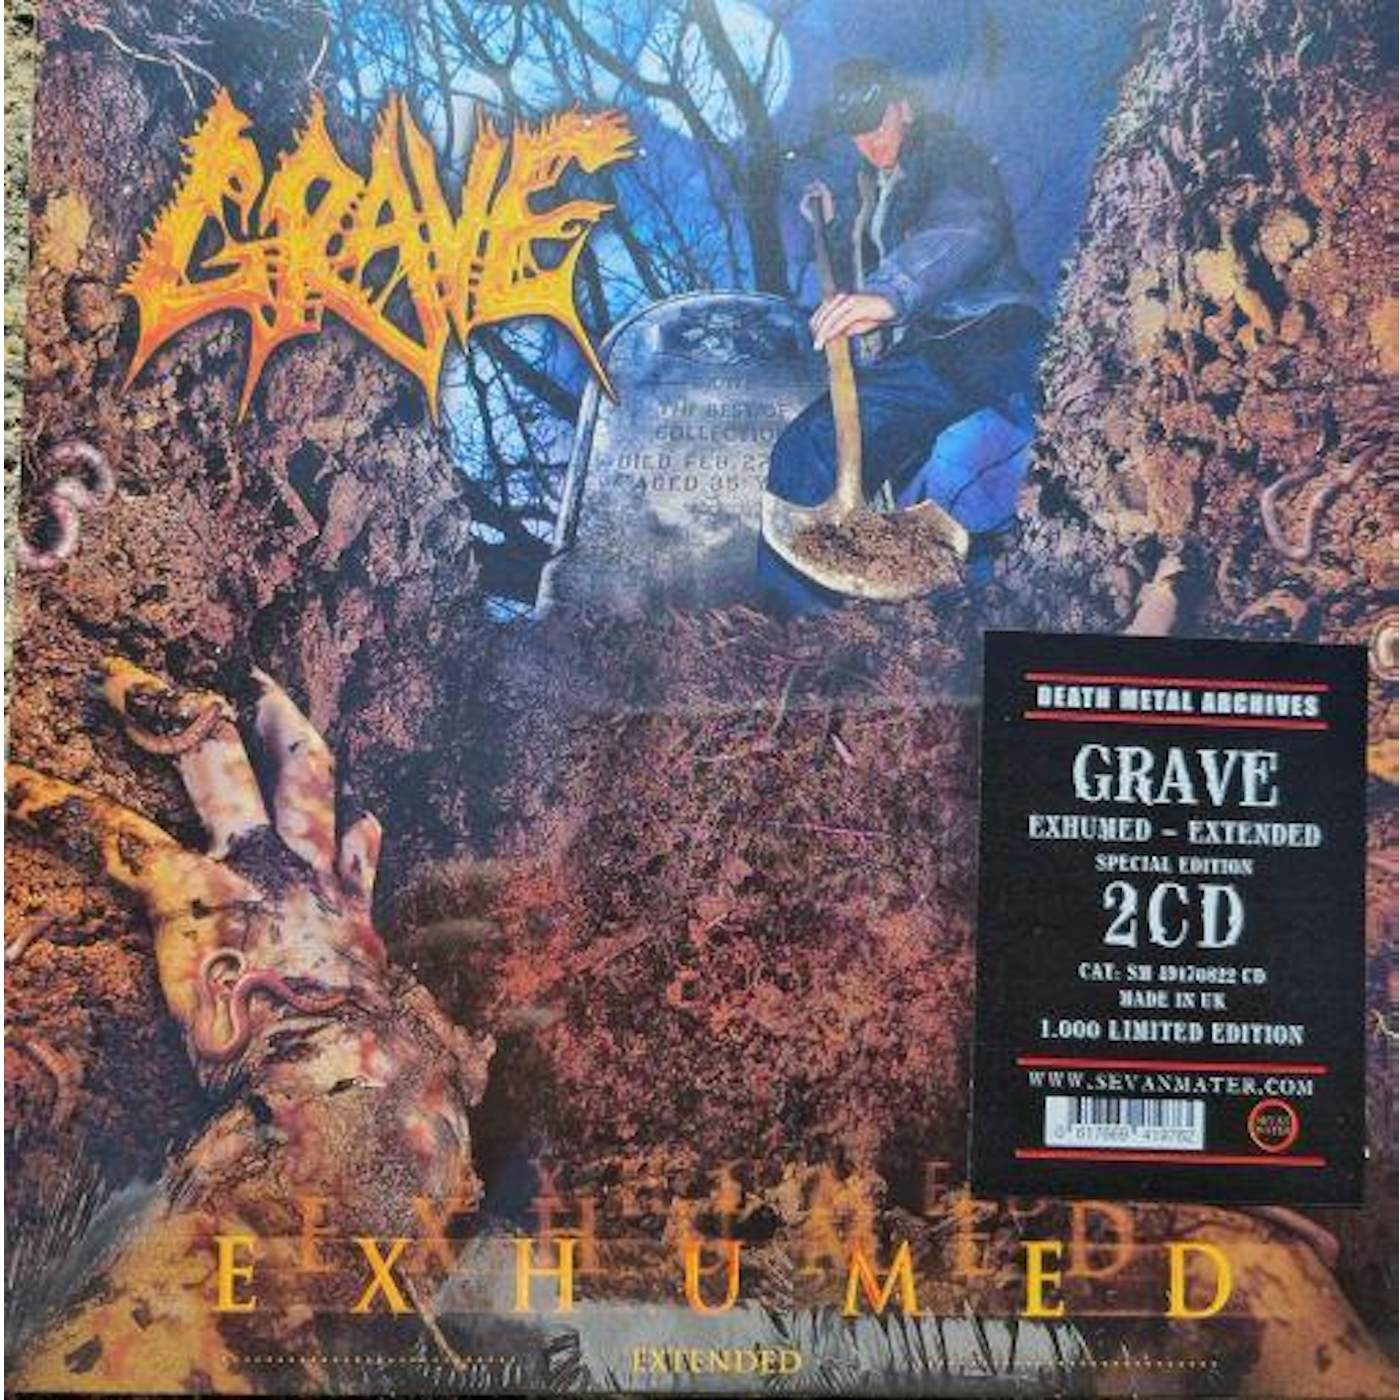 Grave EXHUMED: EXTENDED CD